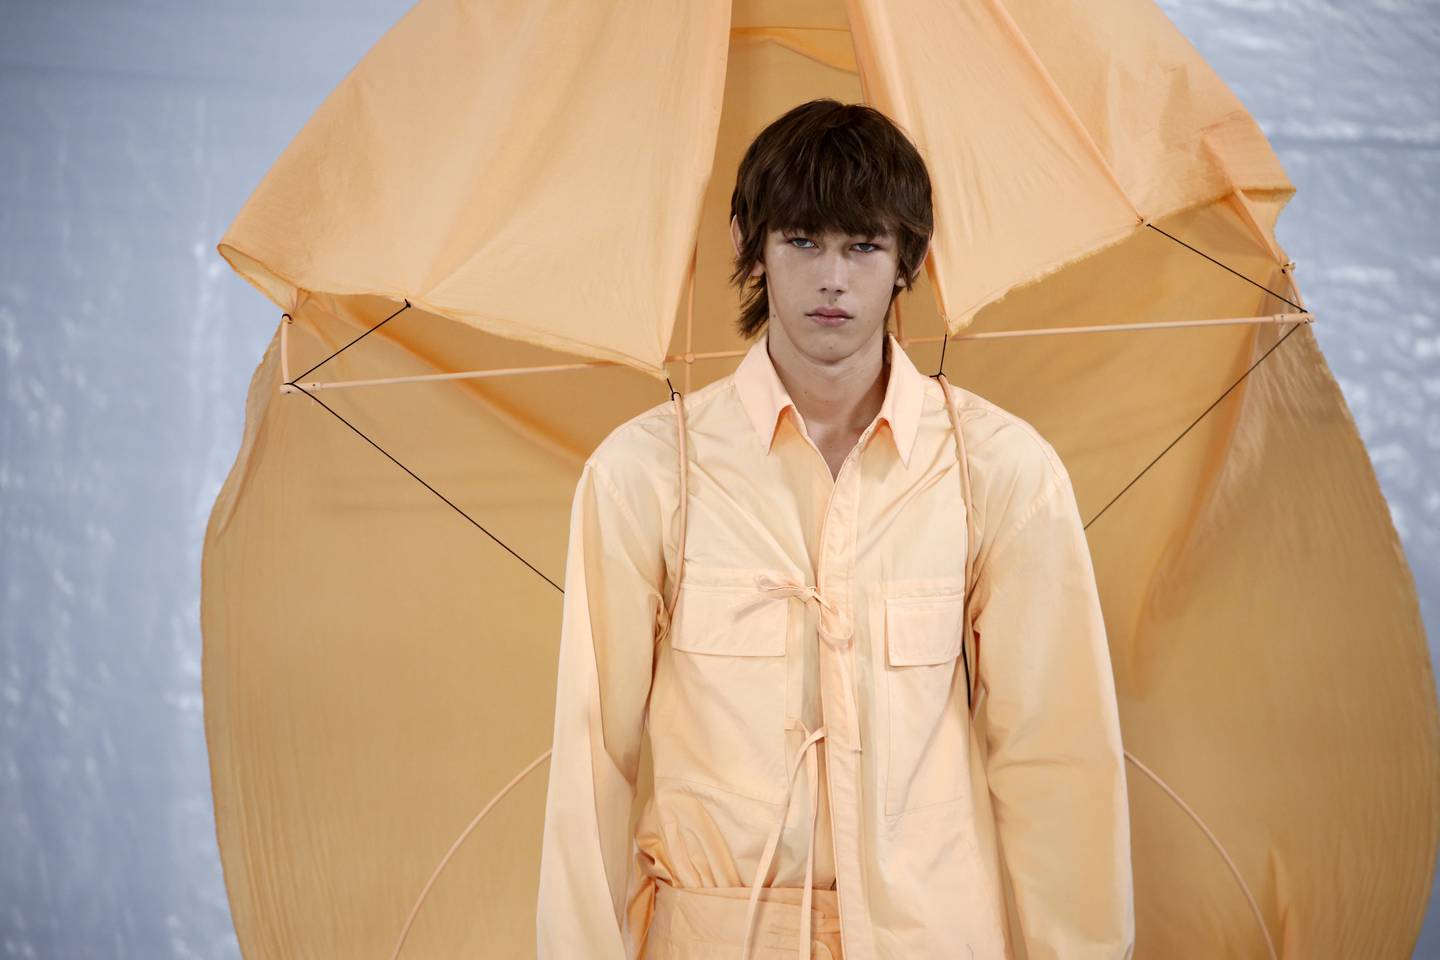 Craig Green menswear spring/summer 2023 brought an inventive, fashion-forward take on uniforms. Getty Images